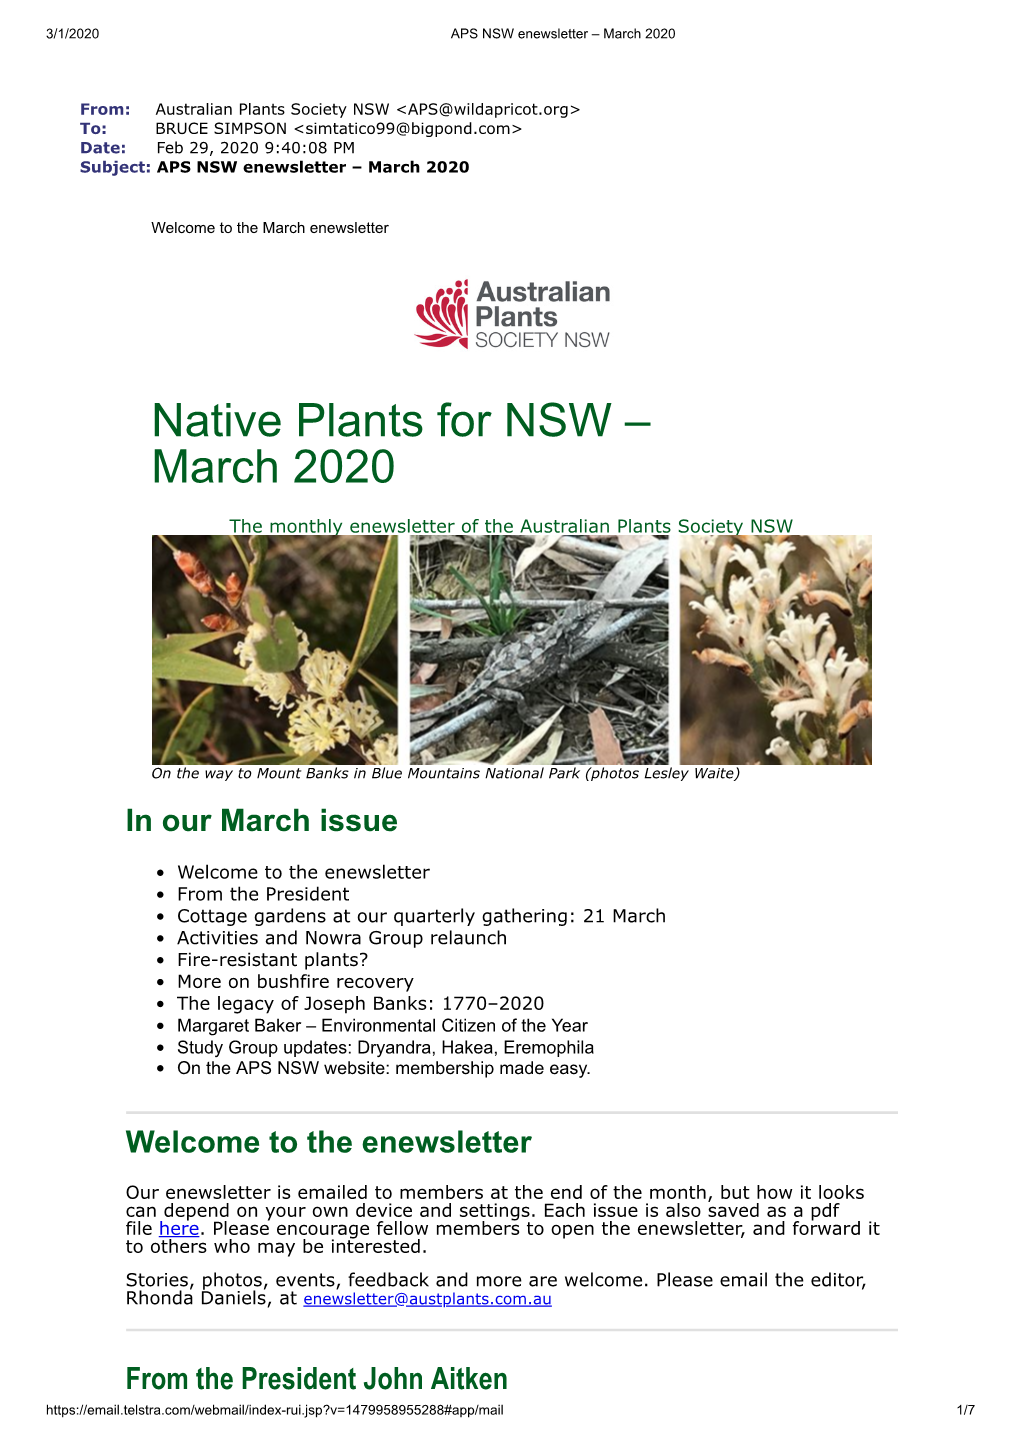 Native Plants for NSW – March 2020